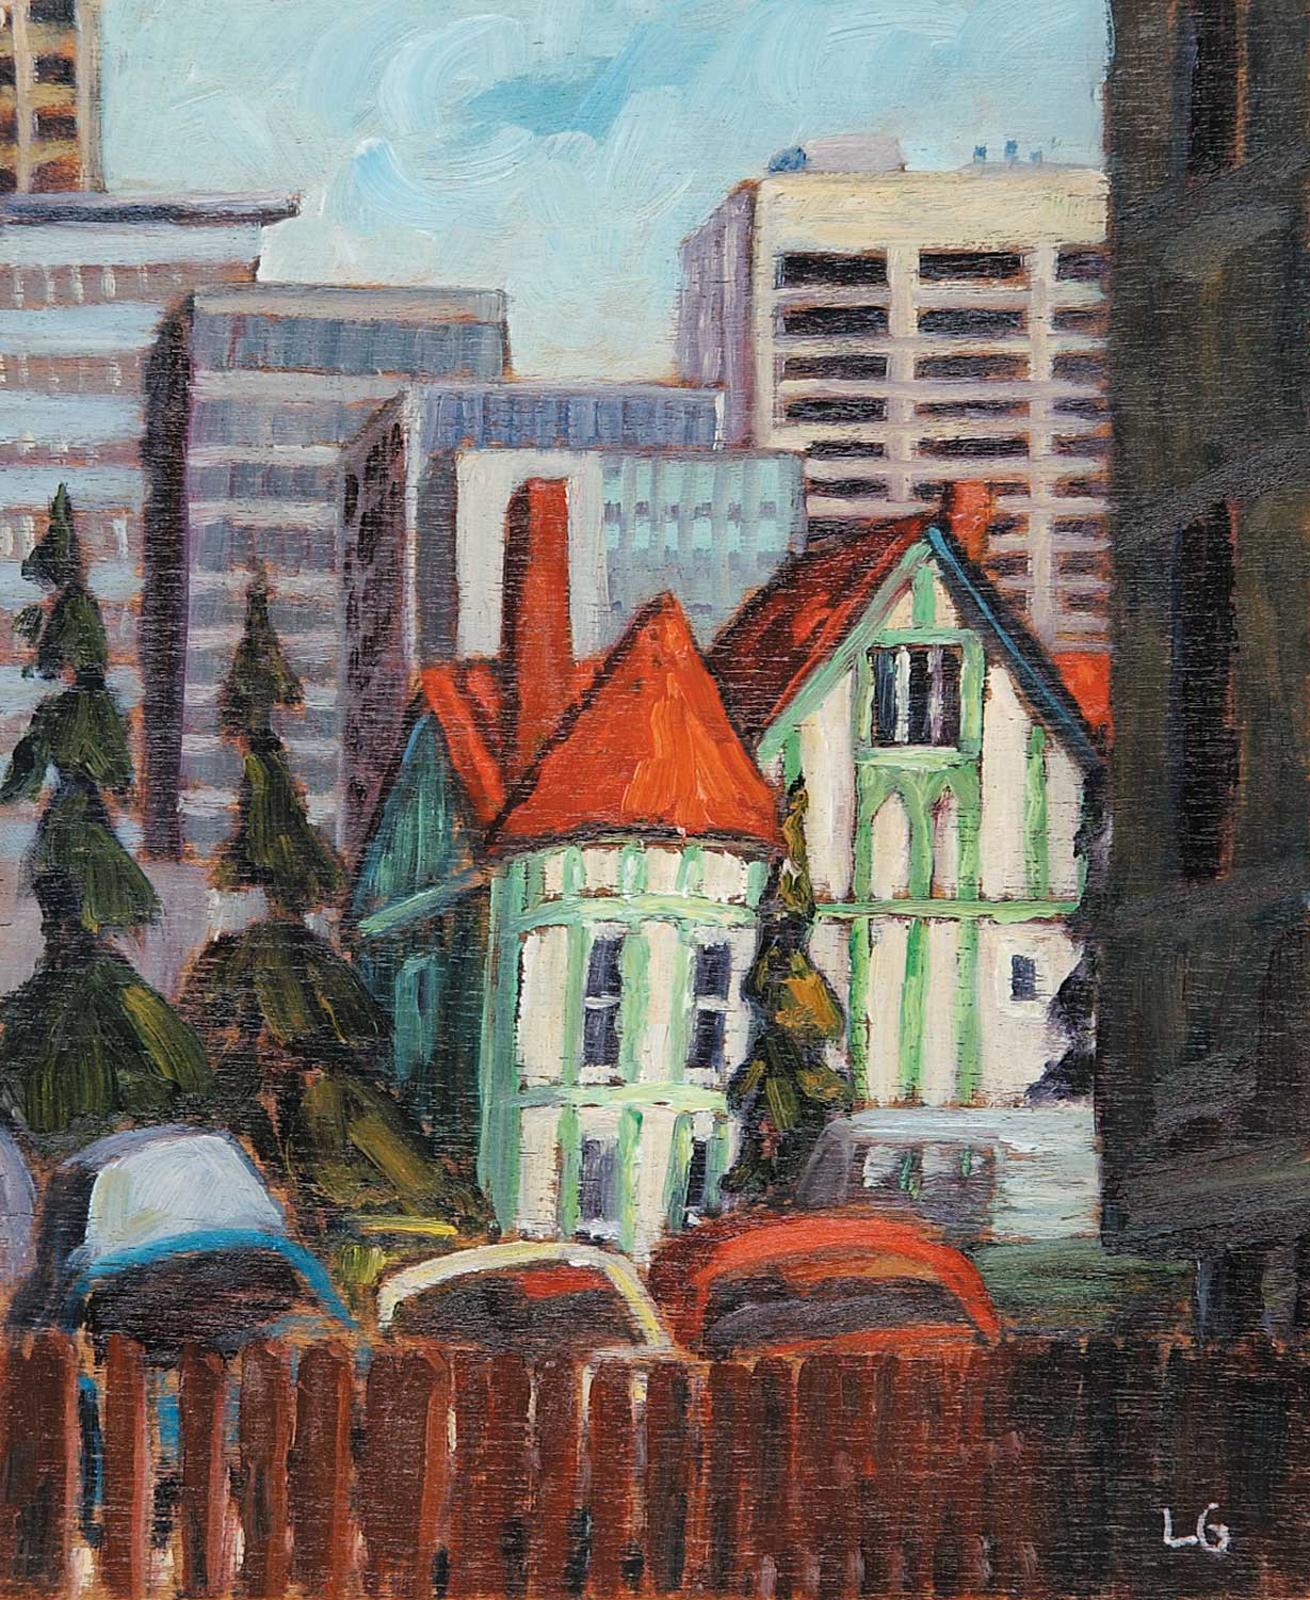 Louise Gant - Turreted House and High Rises #1, Vicinity 7th St. and 13th Ave.